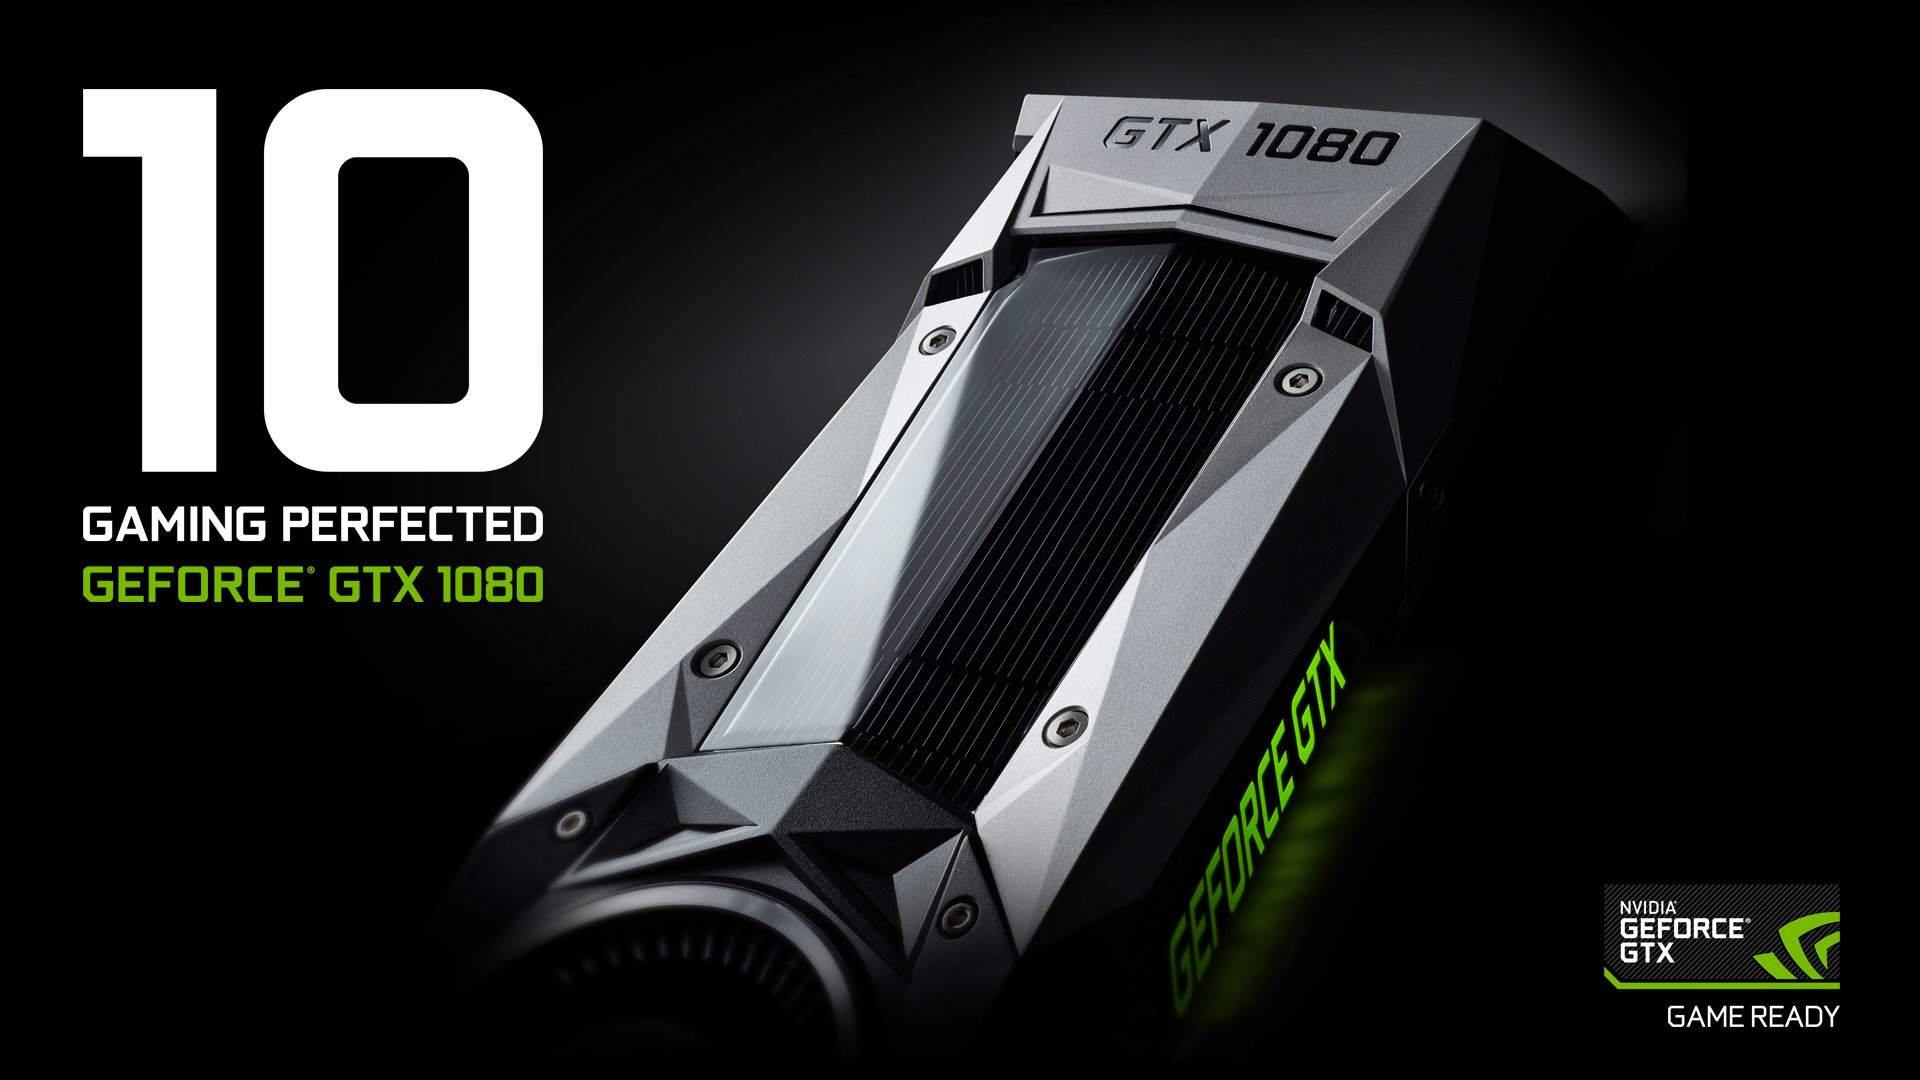 1920x1080 GeForce GTX 1080 Graphics Card: Gaming Perfected.